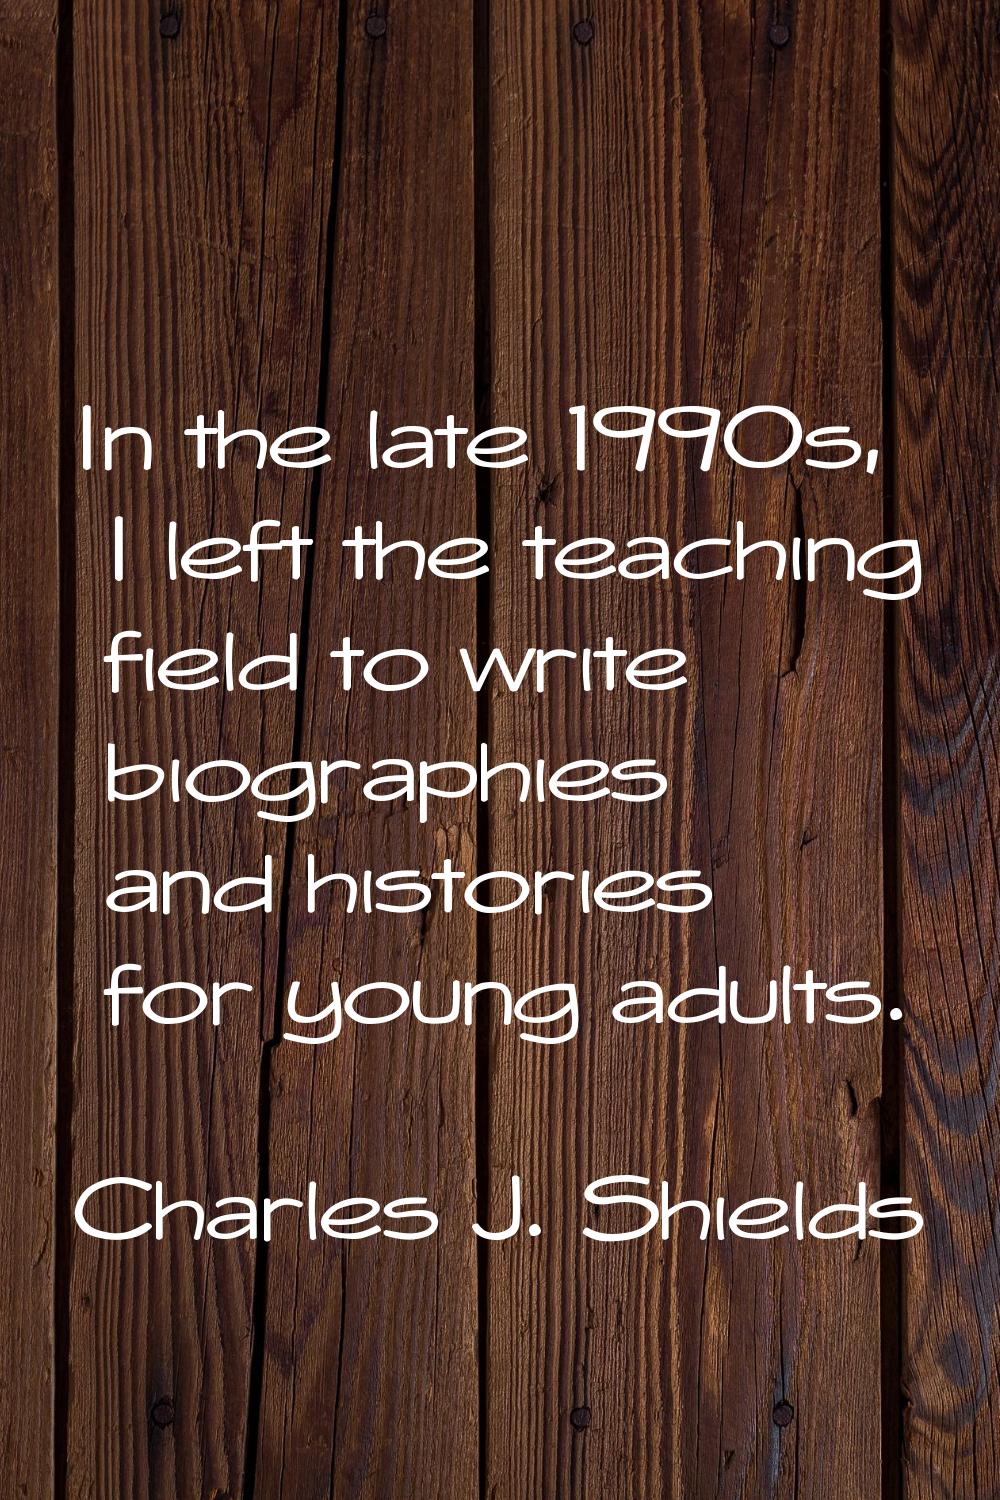 In the late 1990s, I left the teaching field to write biographies and histories for young adults.